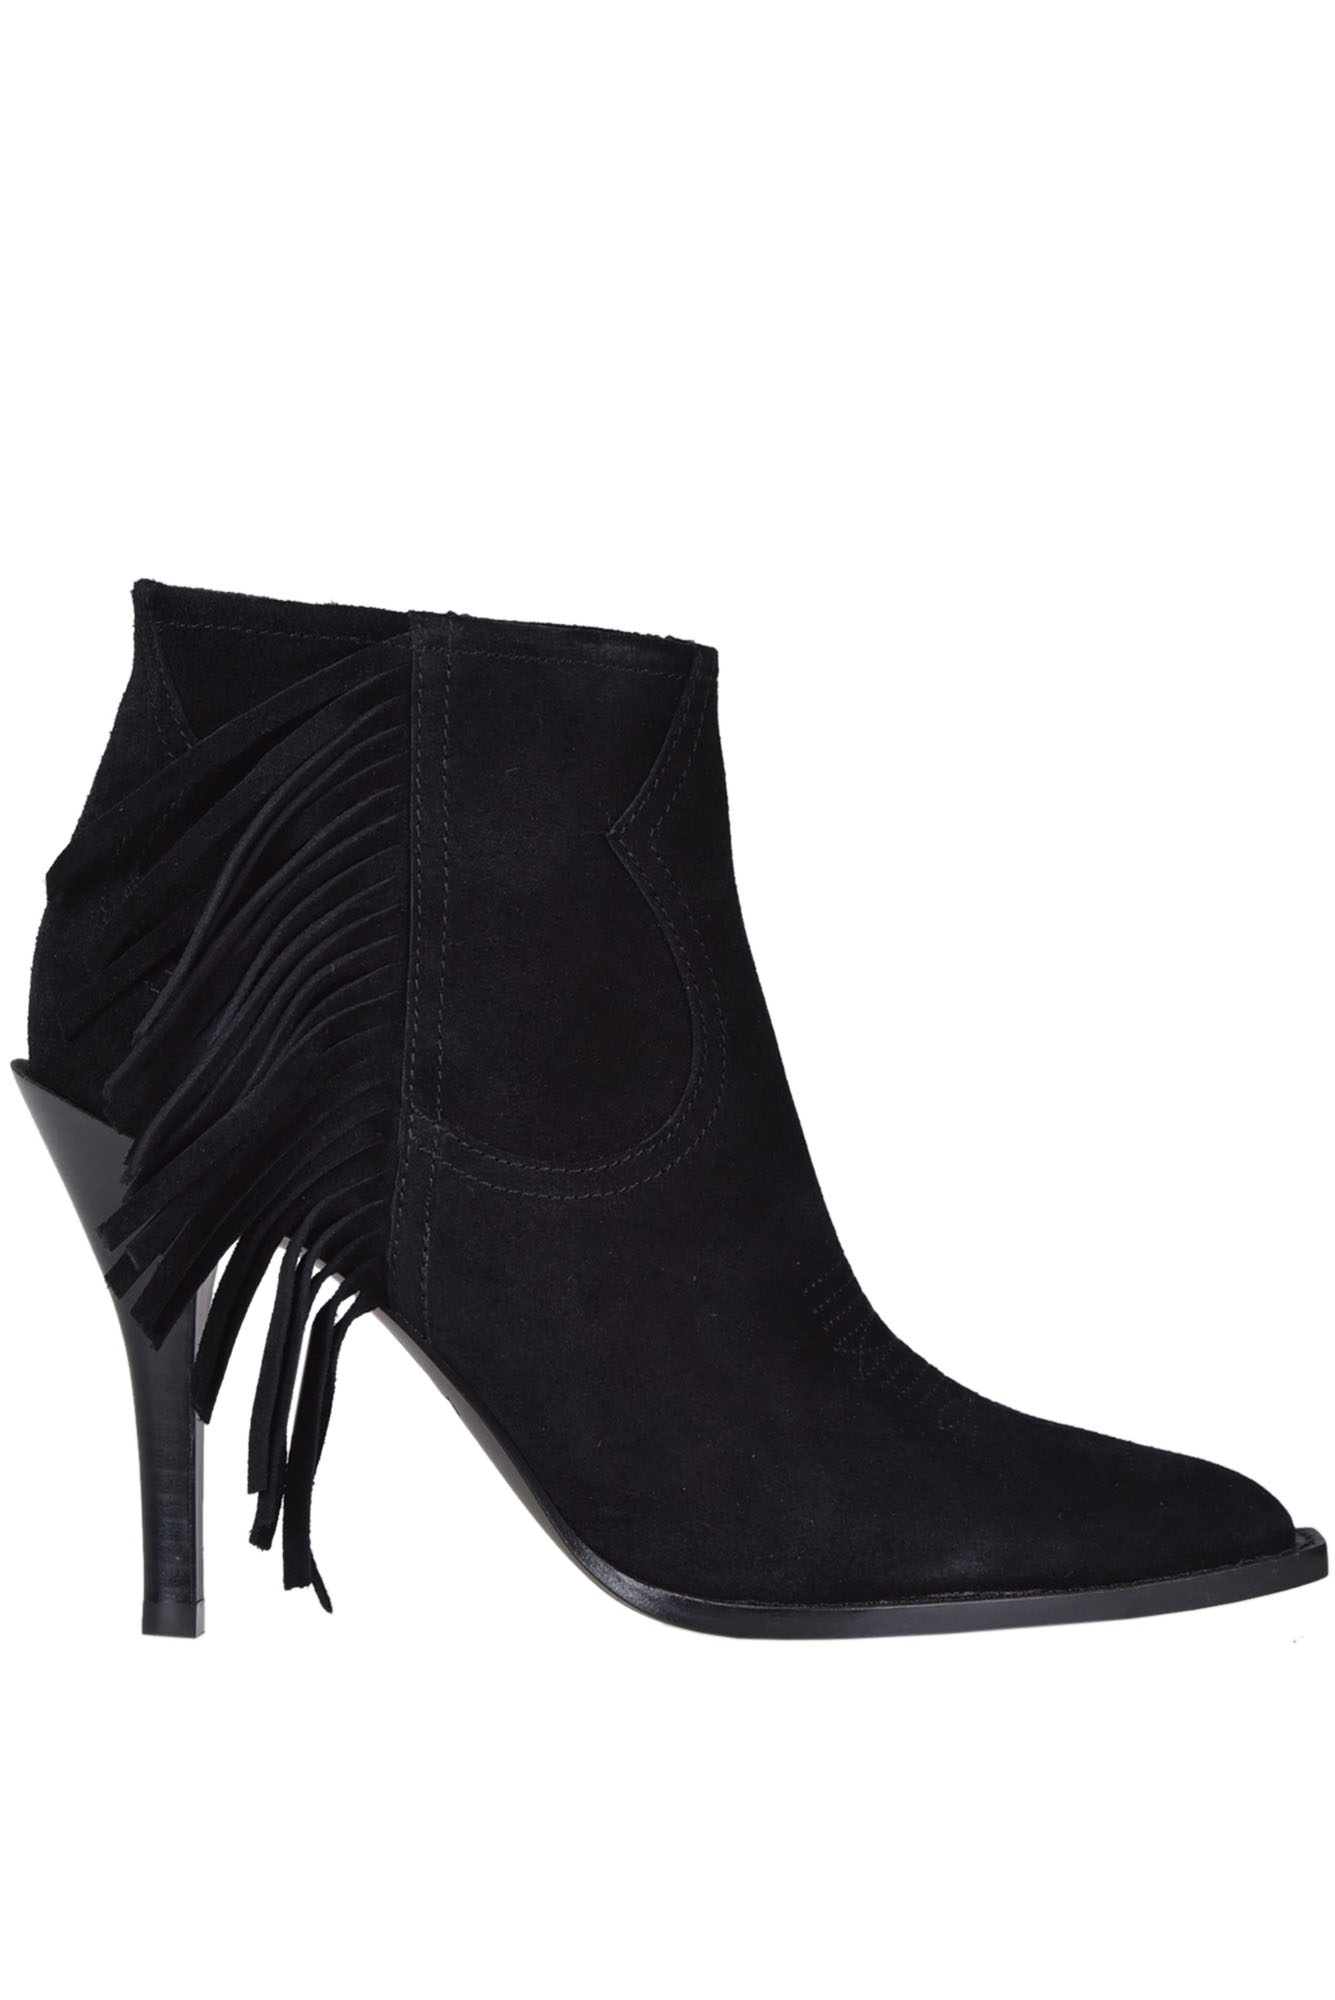 Alabama Suede Ankle-Boots